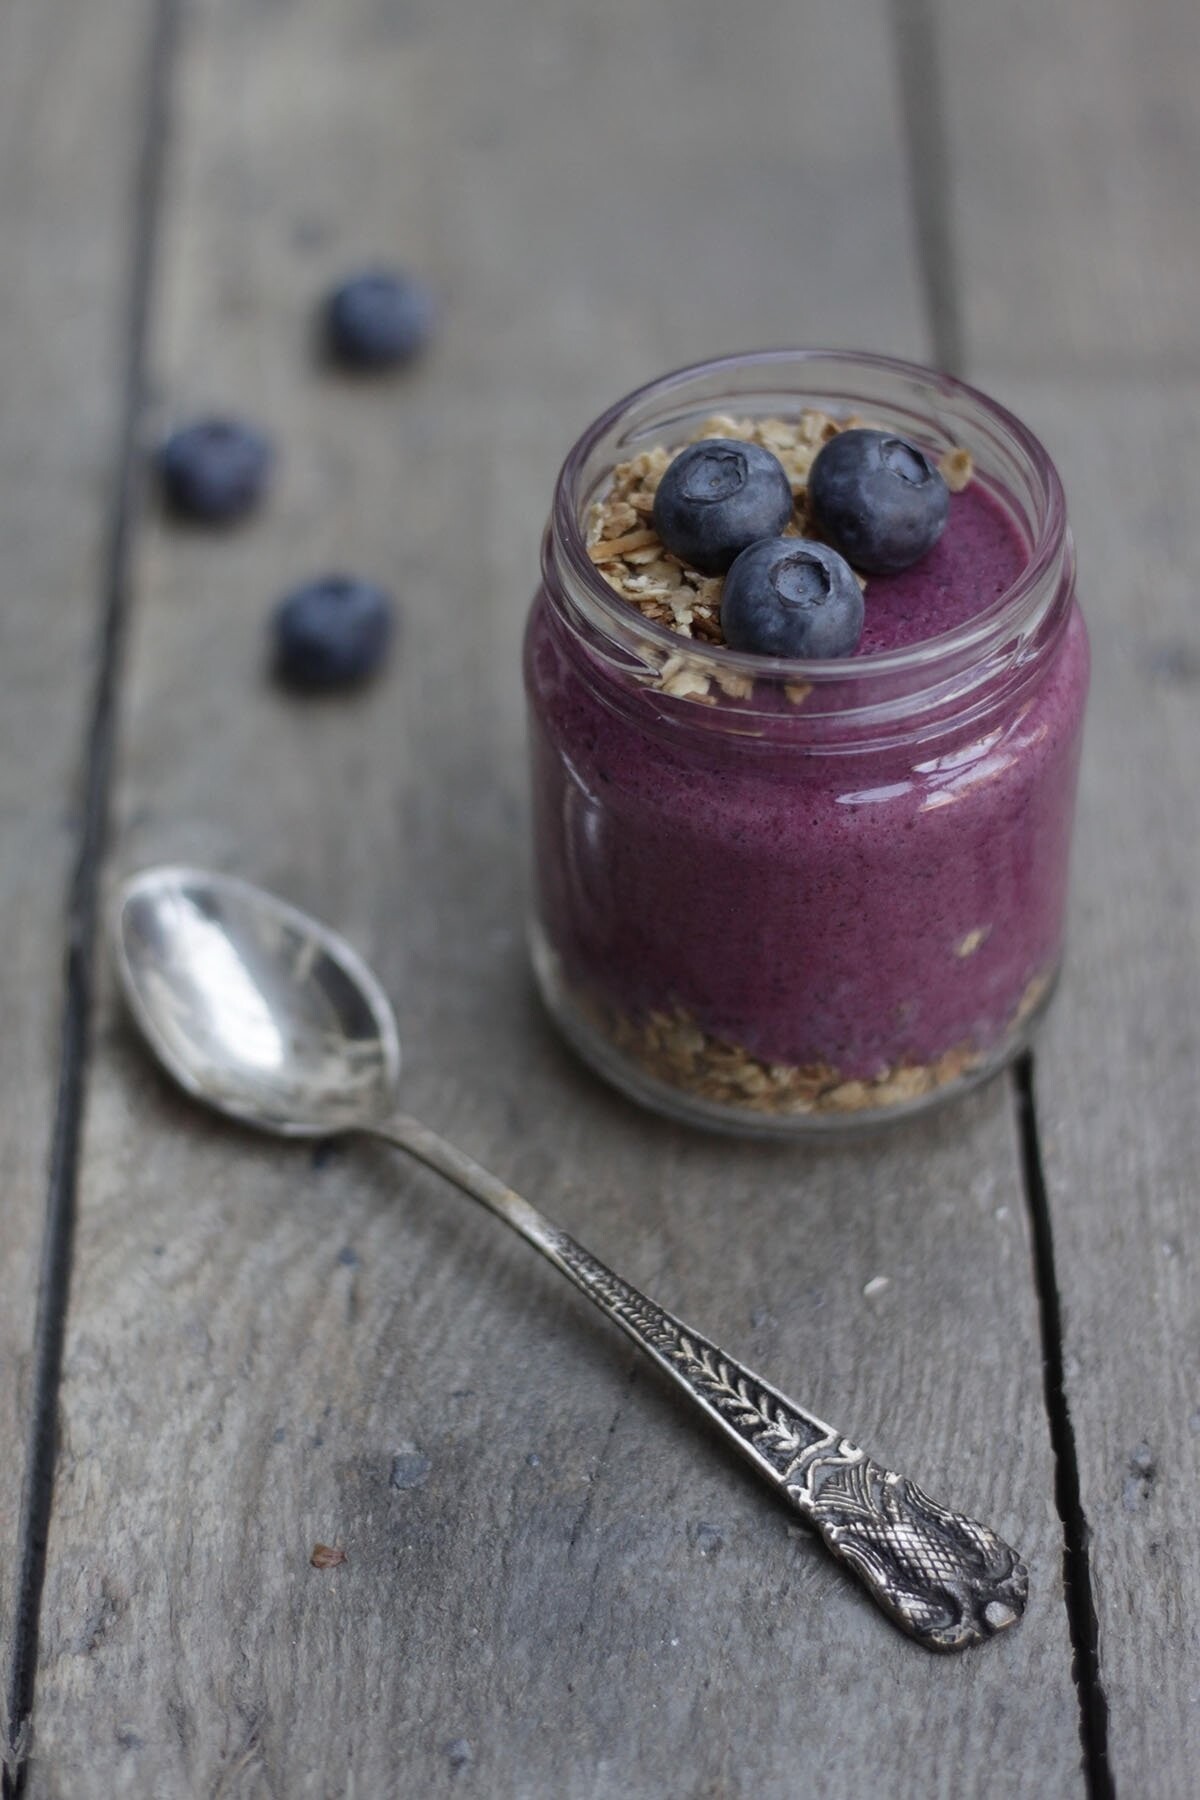 This blueberry mousse was created as a plant-based alternative to conventional patisserie choices and another add-up to the multiple uses of the delicious and healthy blueberries. Served with homemade granola for a crunchy bite, this mousse is smooth and fruity, slightly sweetened to balance with the sourness of berries, but keeping its taste as fresh as its vivid colour! The right alternative to a fancy breakfast or afternoon snack. Healthy, natural & pure food!